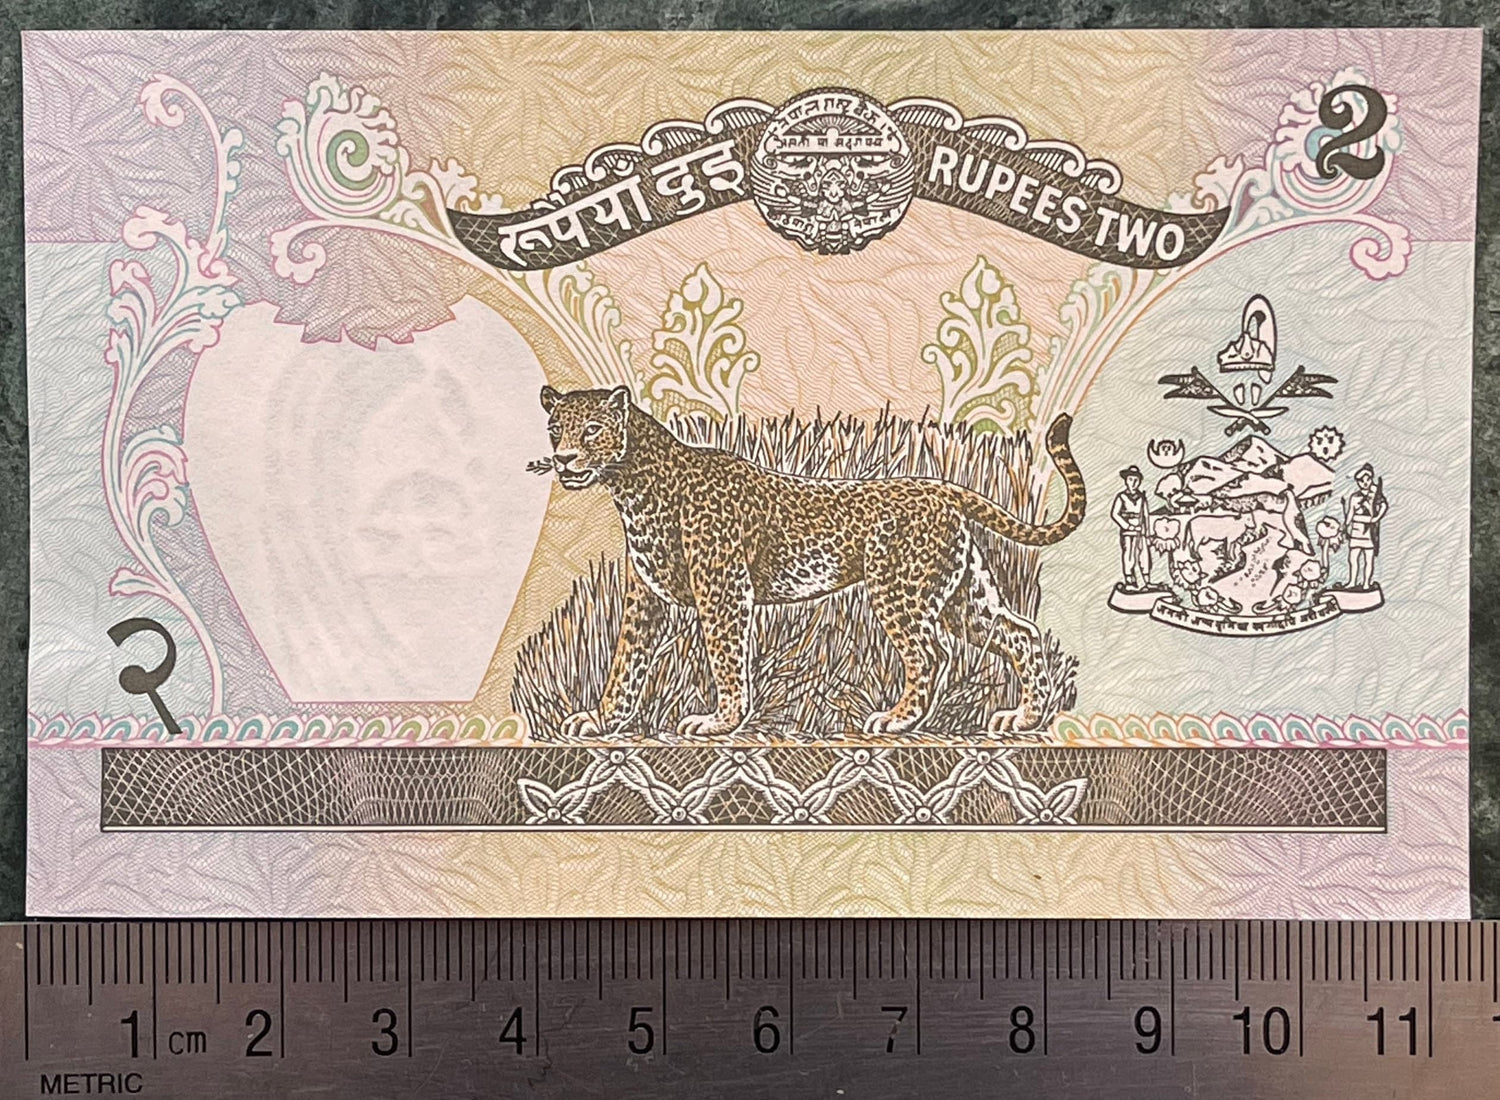 Clouded Leopard, King Birendra, Bajrayogini Temple 2 Rupees Nepal Authentic Banknote Money for Jewelry and Collage (Crown) Tantric Buddhism